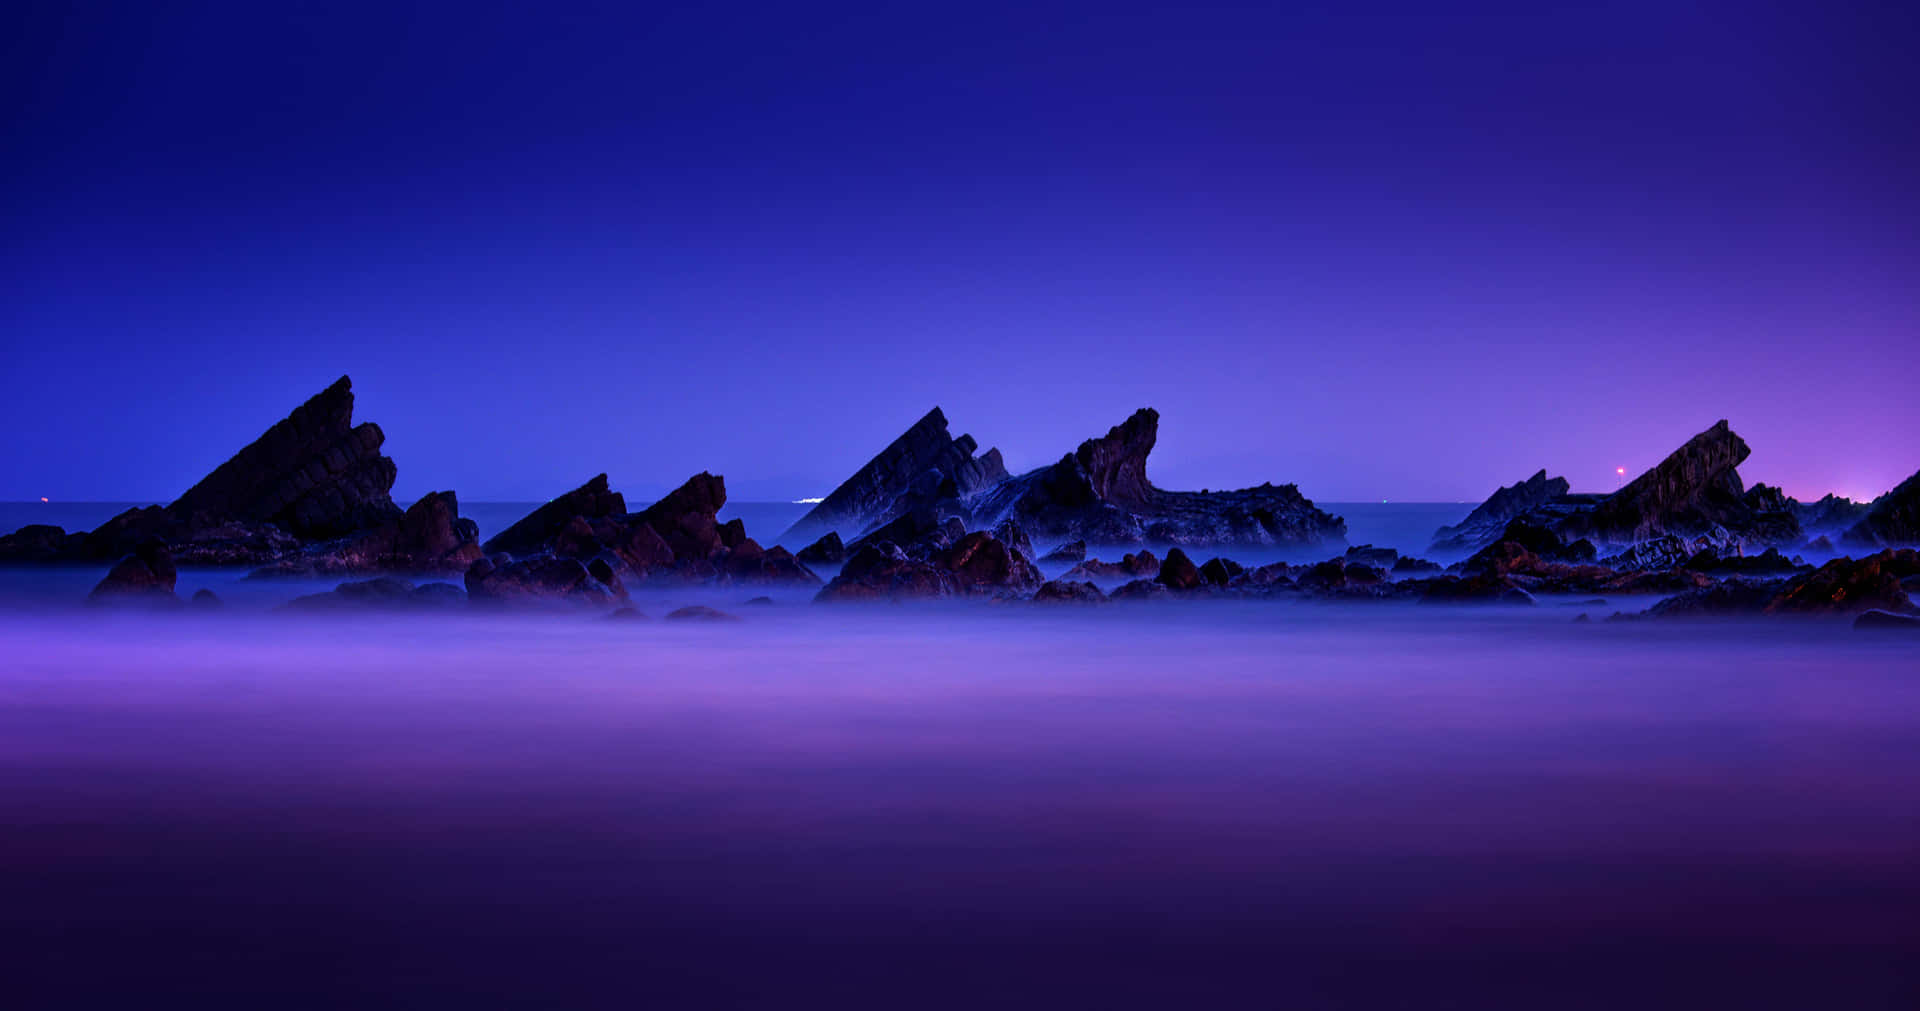 Blue And Purple Sunset With Rock Silhouettes Wallpaper